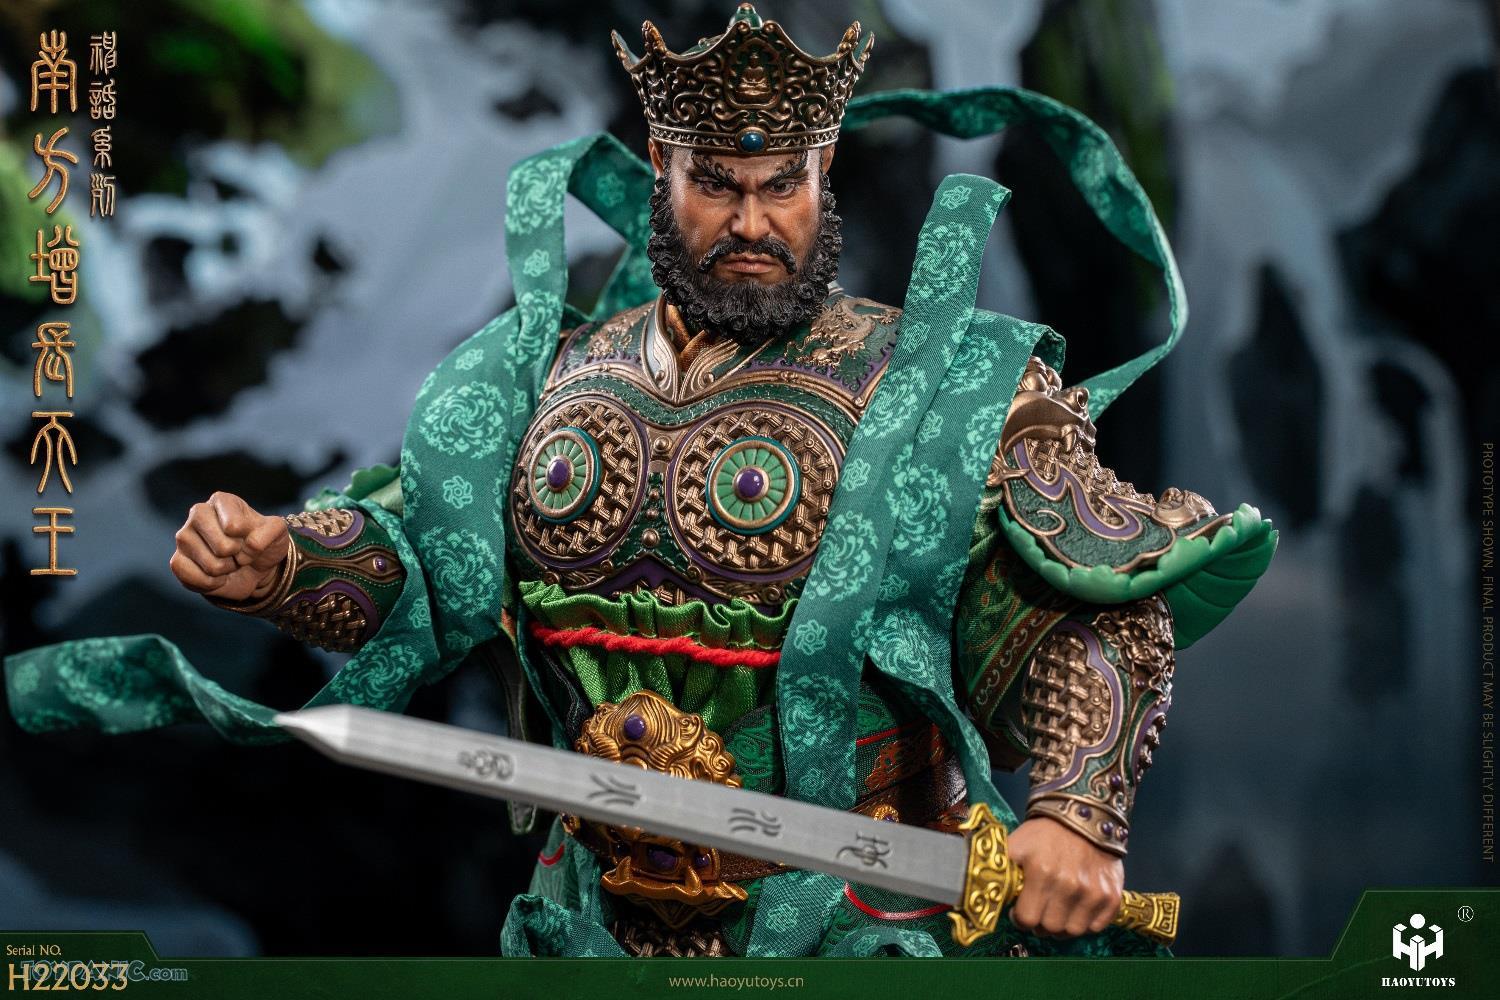 MythSeries - NEW PRODUCT: HaoYuToys 1/6 Myth Series Southern Growth King 212202451839PM_1277904